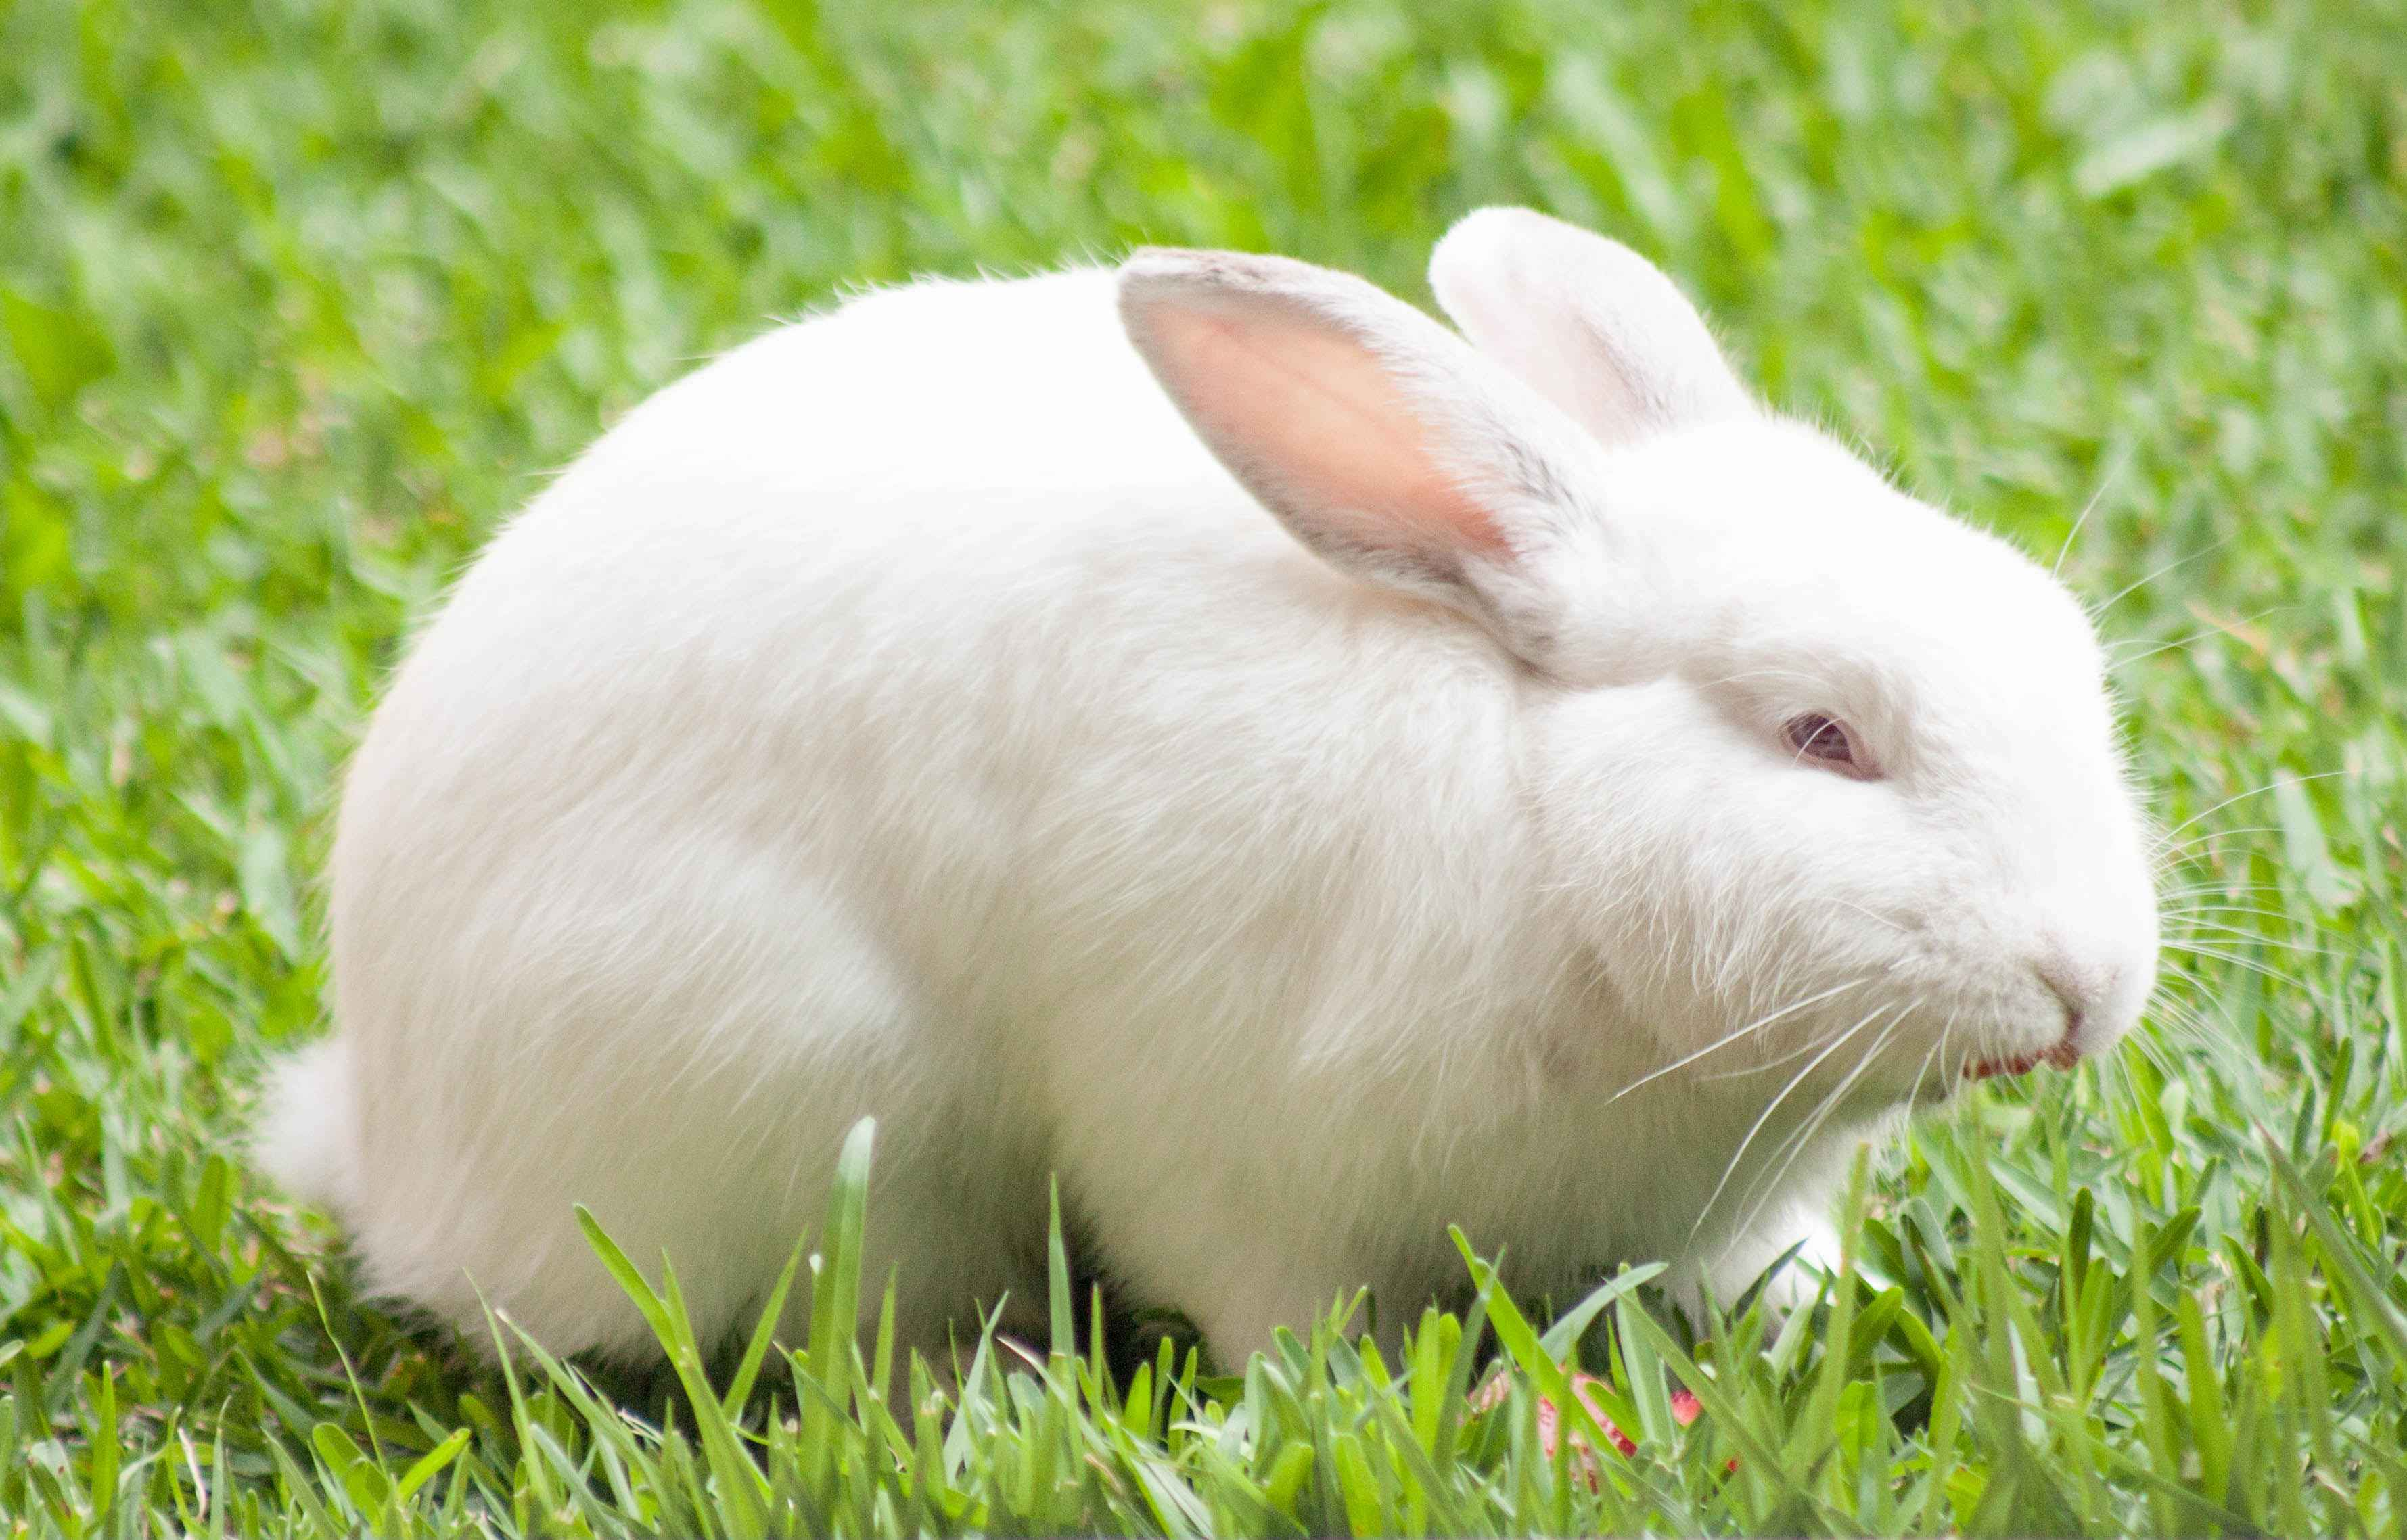 5 Essential Tips to Prevent Bladder Stones in Pet Rabbits